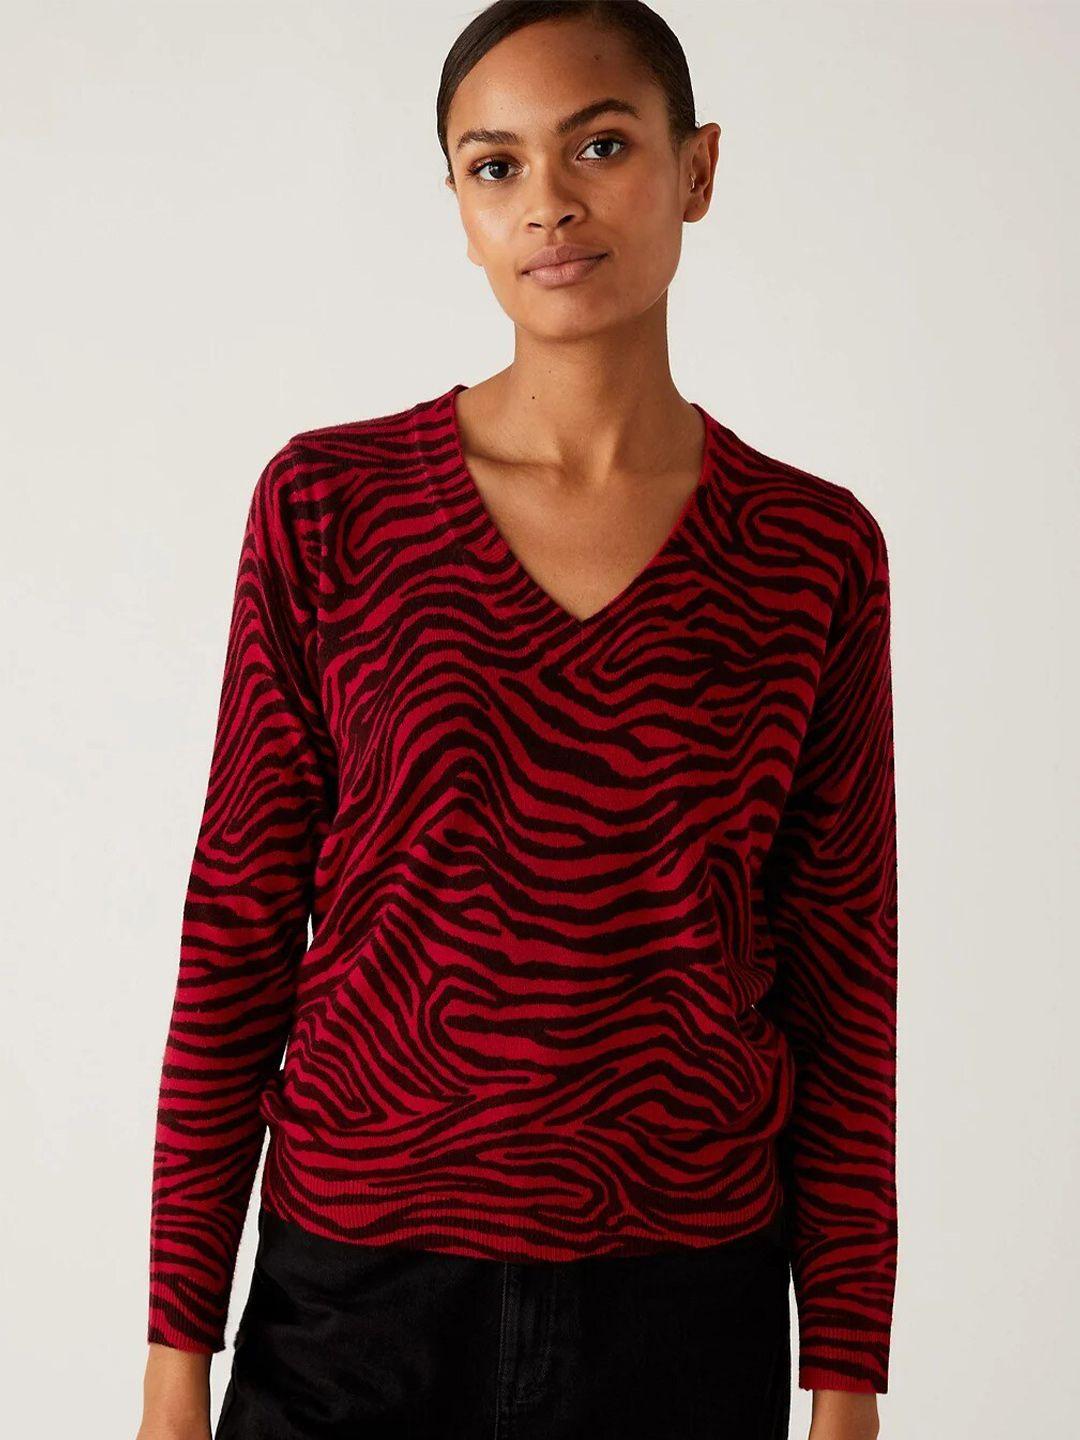 marks & spencer women animal printed acrylic pullover